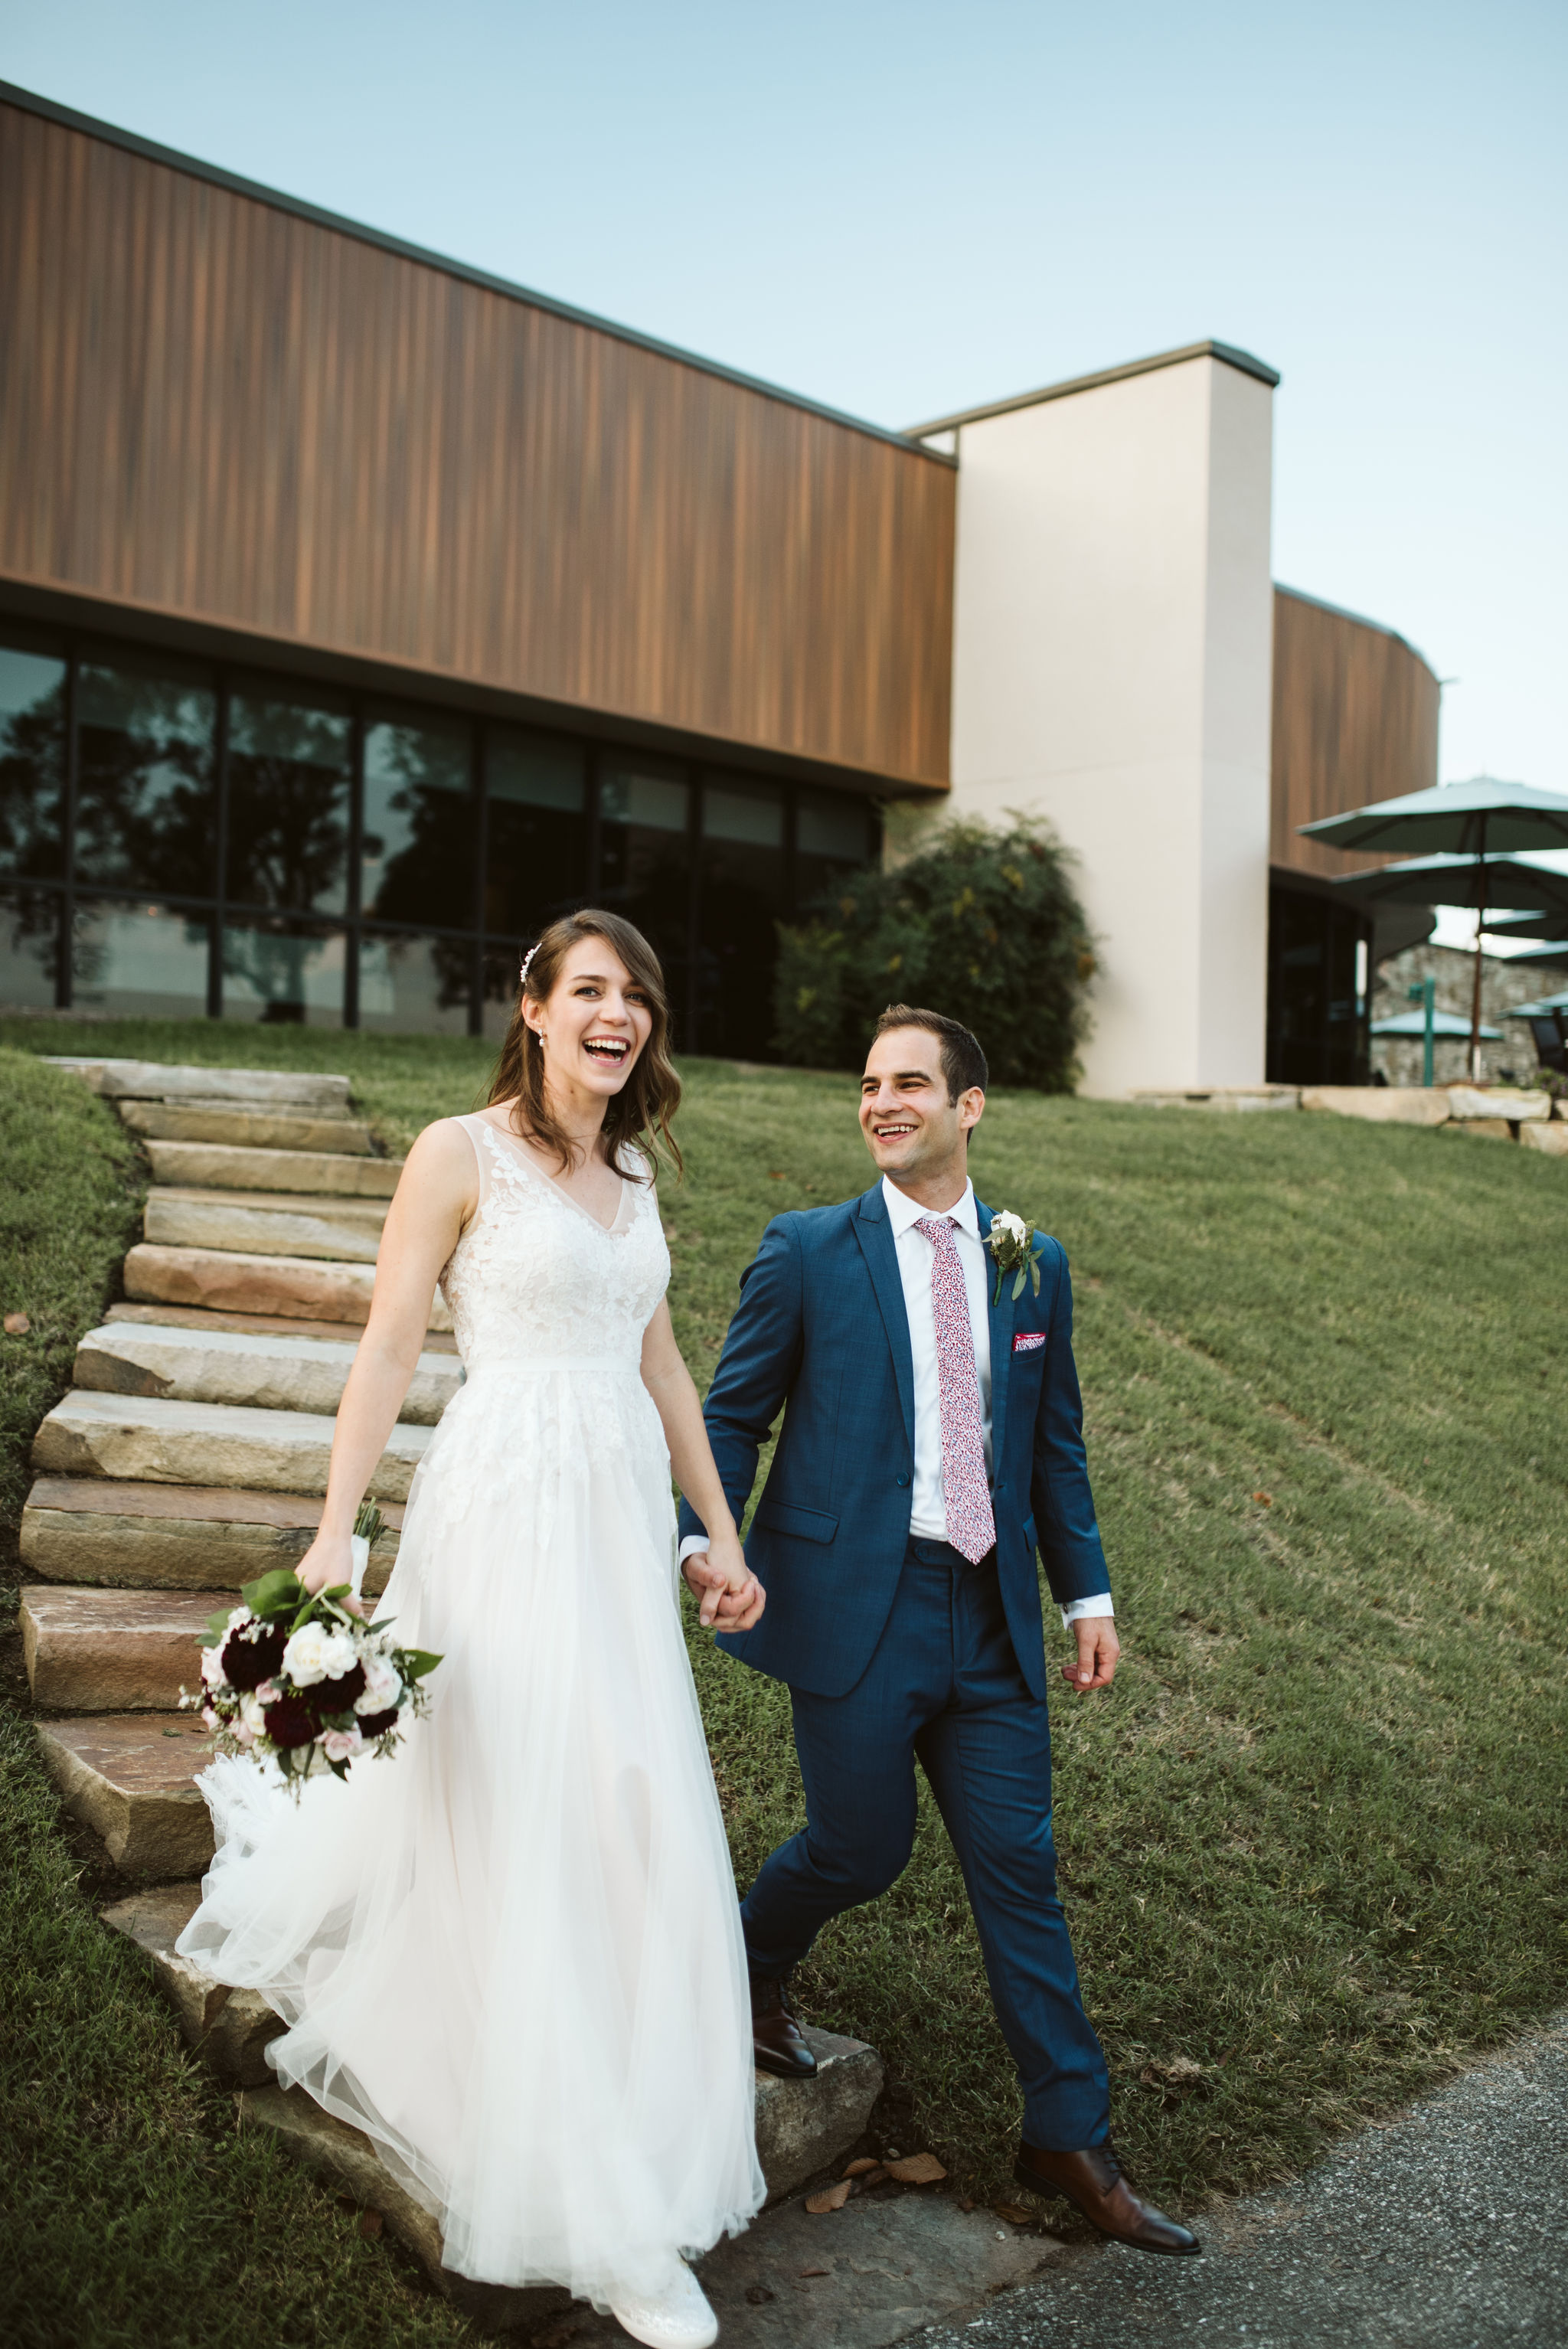  Phoenix Maryland, Baltimore Wedding Photographer, Eagle’s Nest Country Club, Classic, Romantic, Spring, Bride and Groom Walking Down Rock Stairway, BHLDN Dress, Generation Tux Suit 